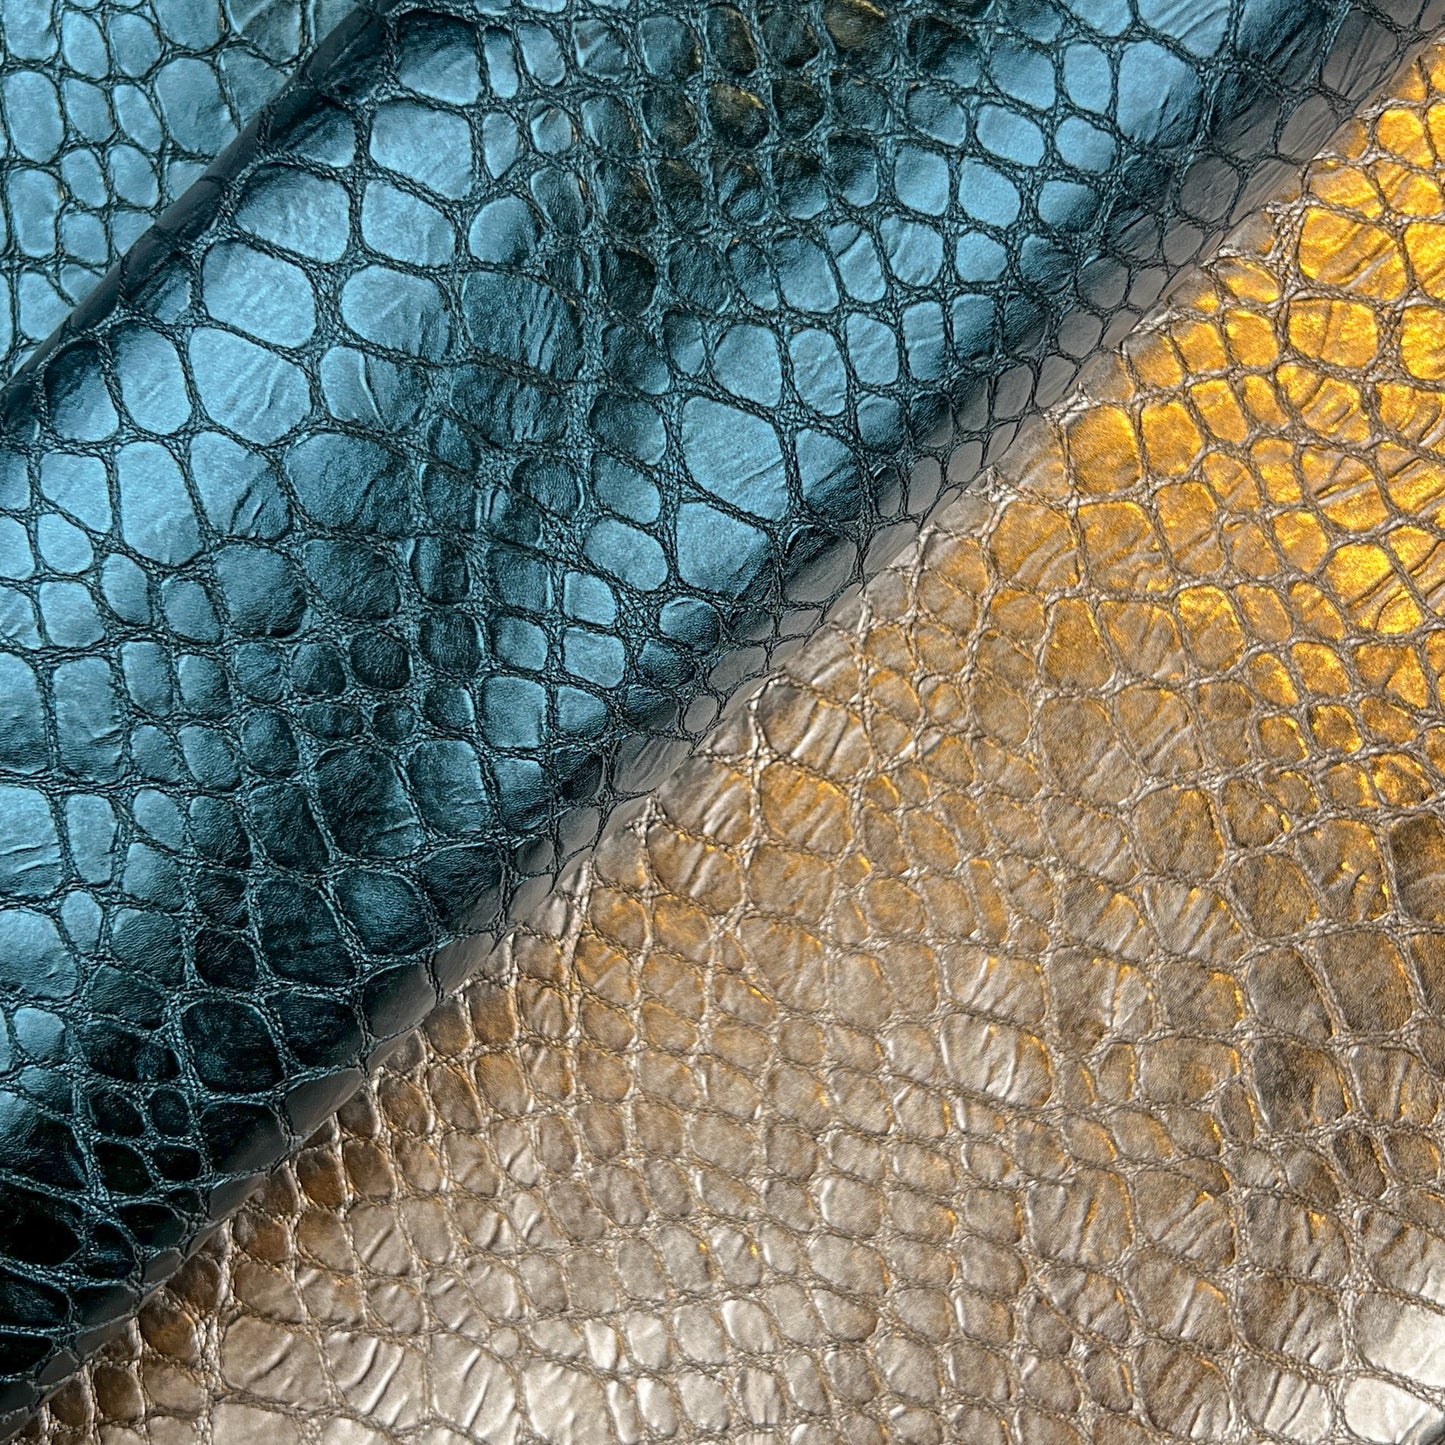 Light Gold And Teal Blue Metallic Lambskin 1mm/2.5oz TEAL & GOLD REPTILE 1505